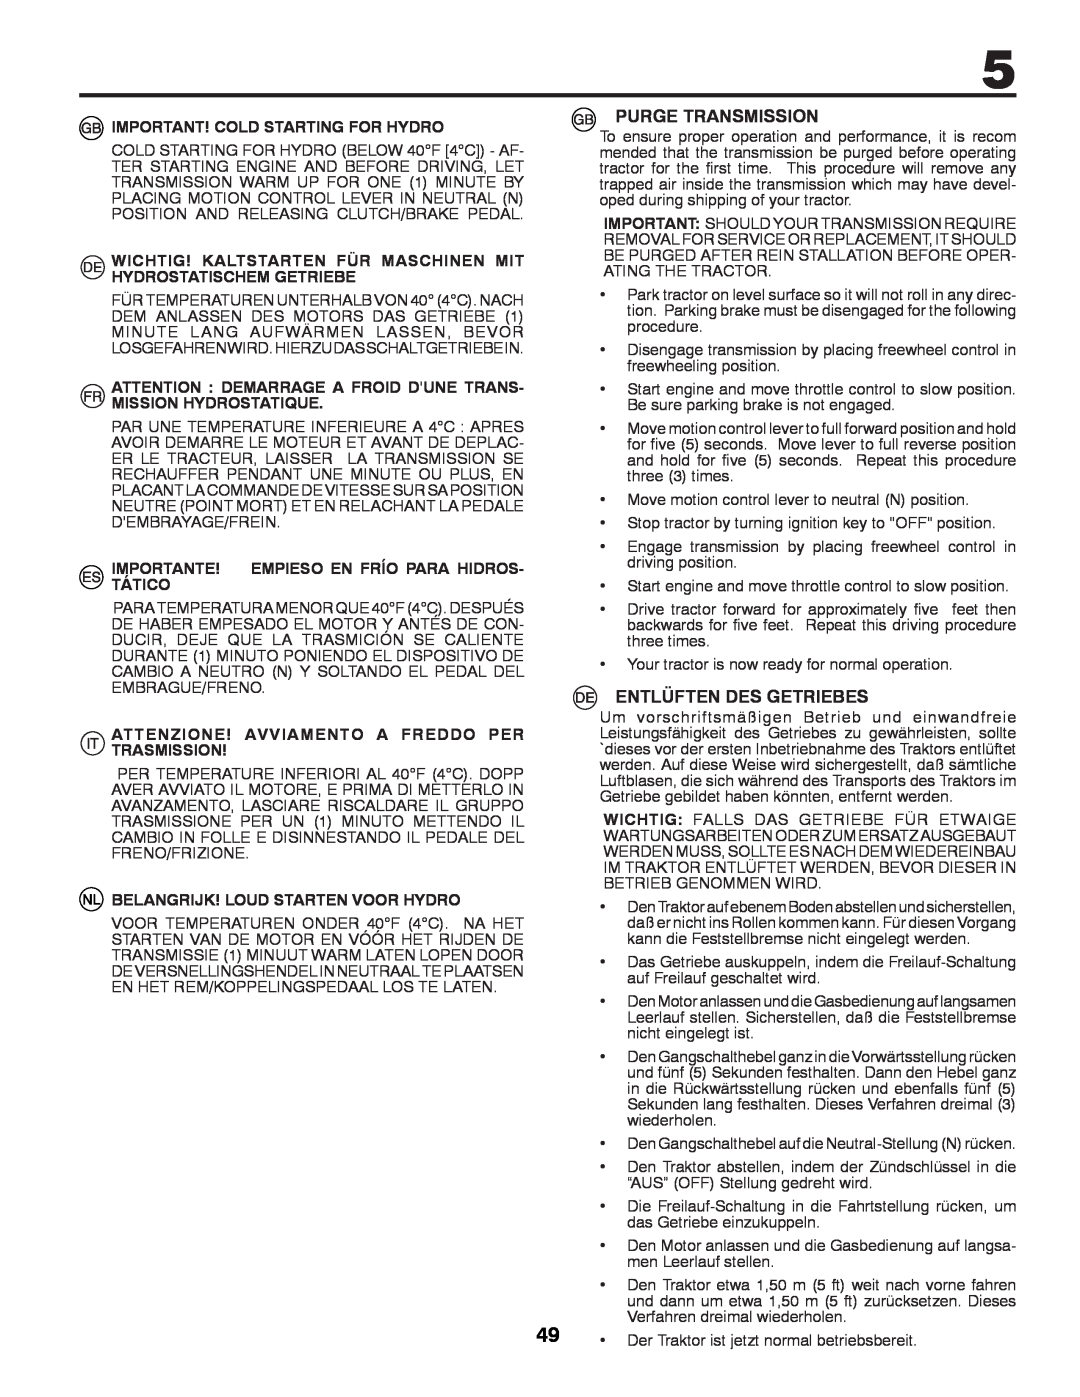 Partner Tech P200107HRB instruction manual Purge Transmission, Entlüften Des Getriebes, Important! Cold Starting For Hydro 